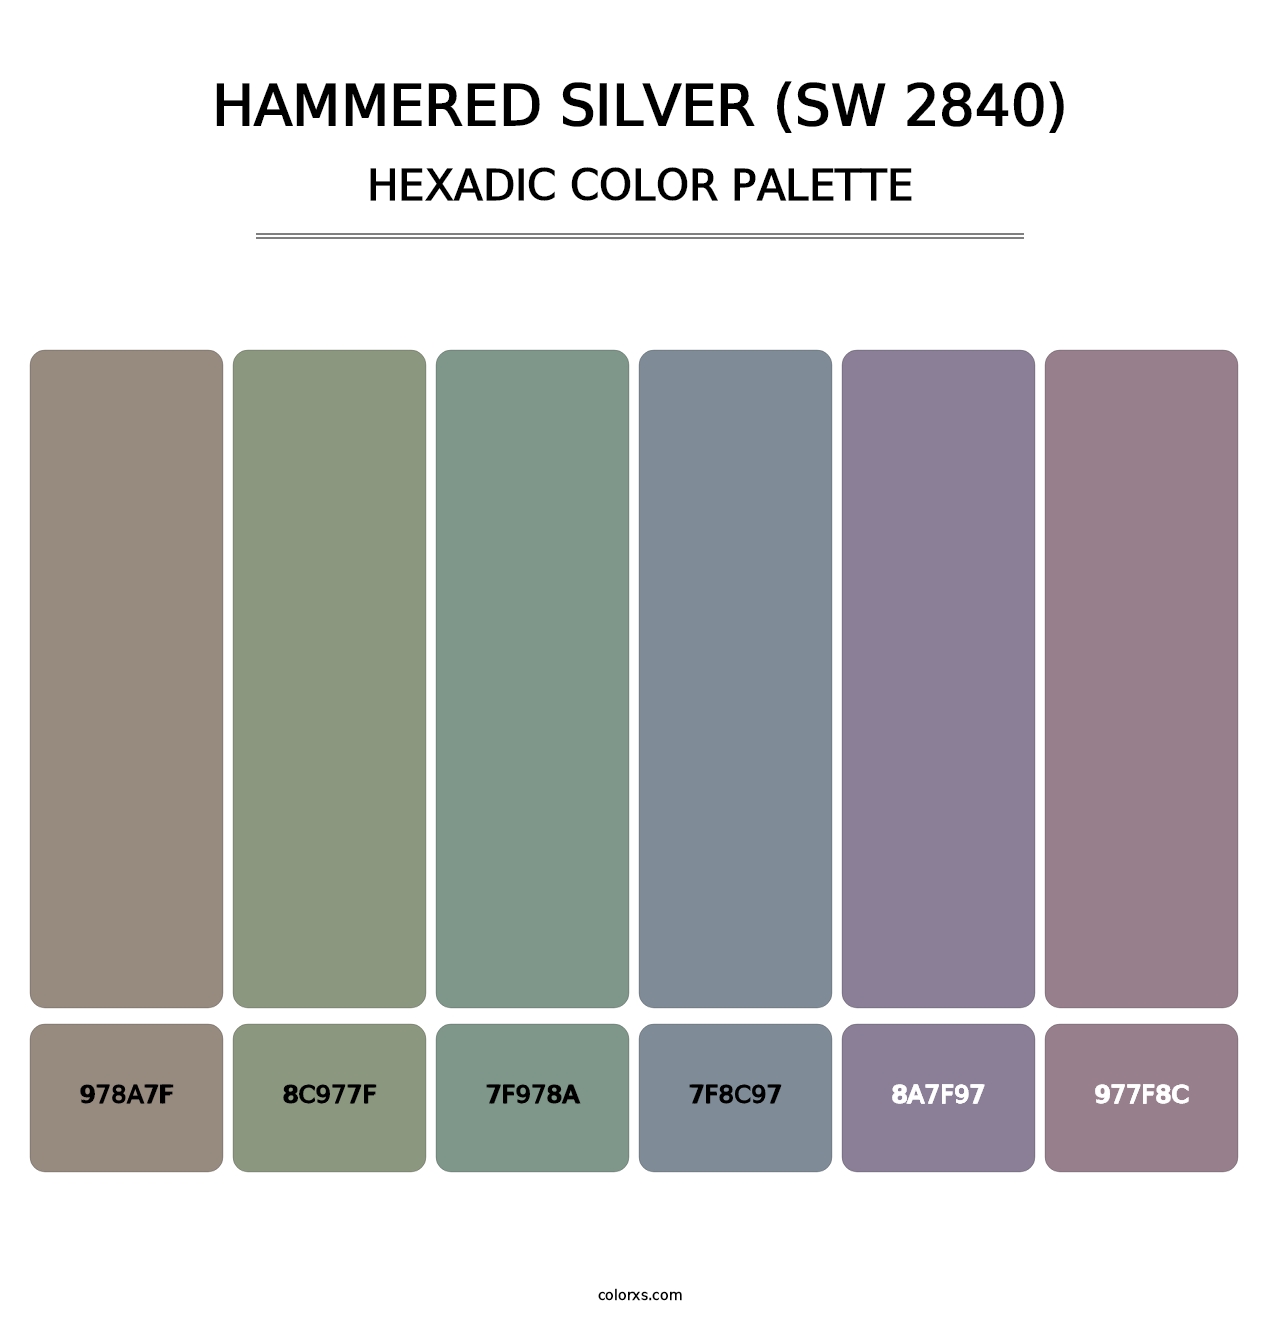 Hammered Silver (SW 2840) - Hexadic Color Palette